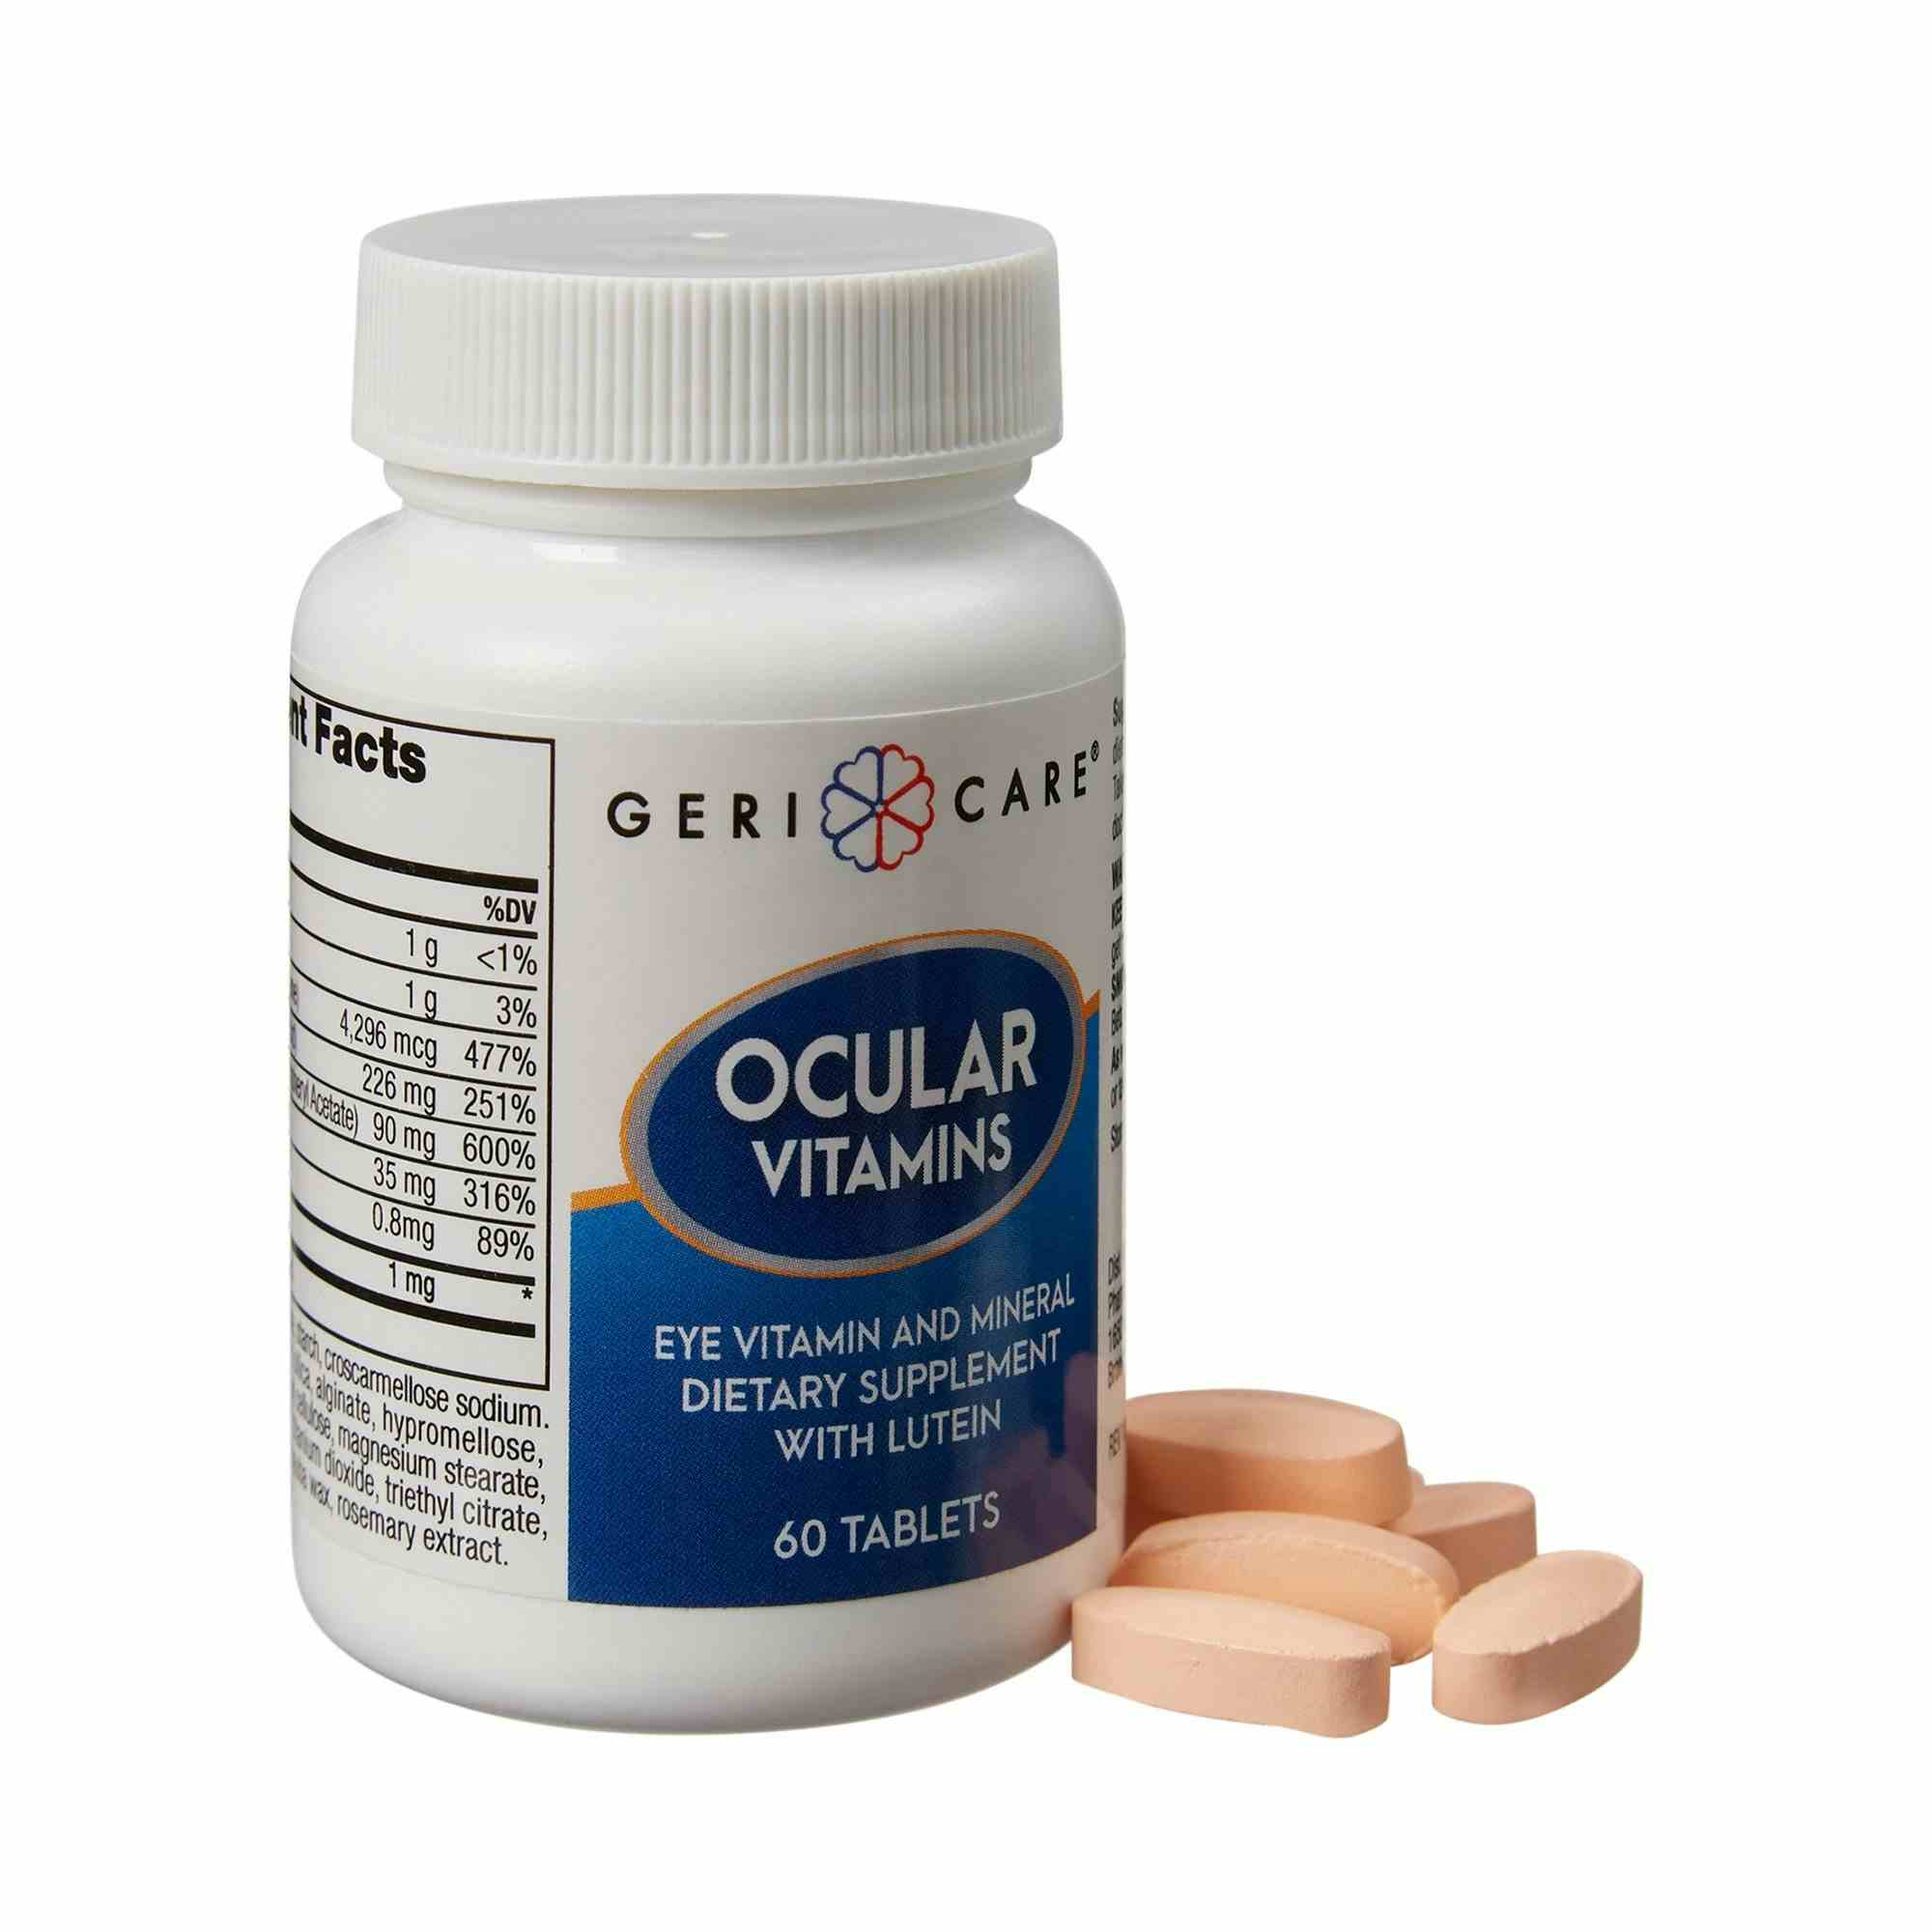 Geri-Care Ocular Vitamins Eye Mineral and Dietary Supplement with Lutein, 60 Tablets